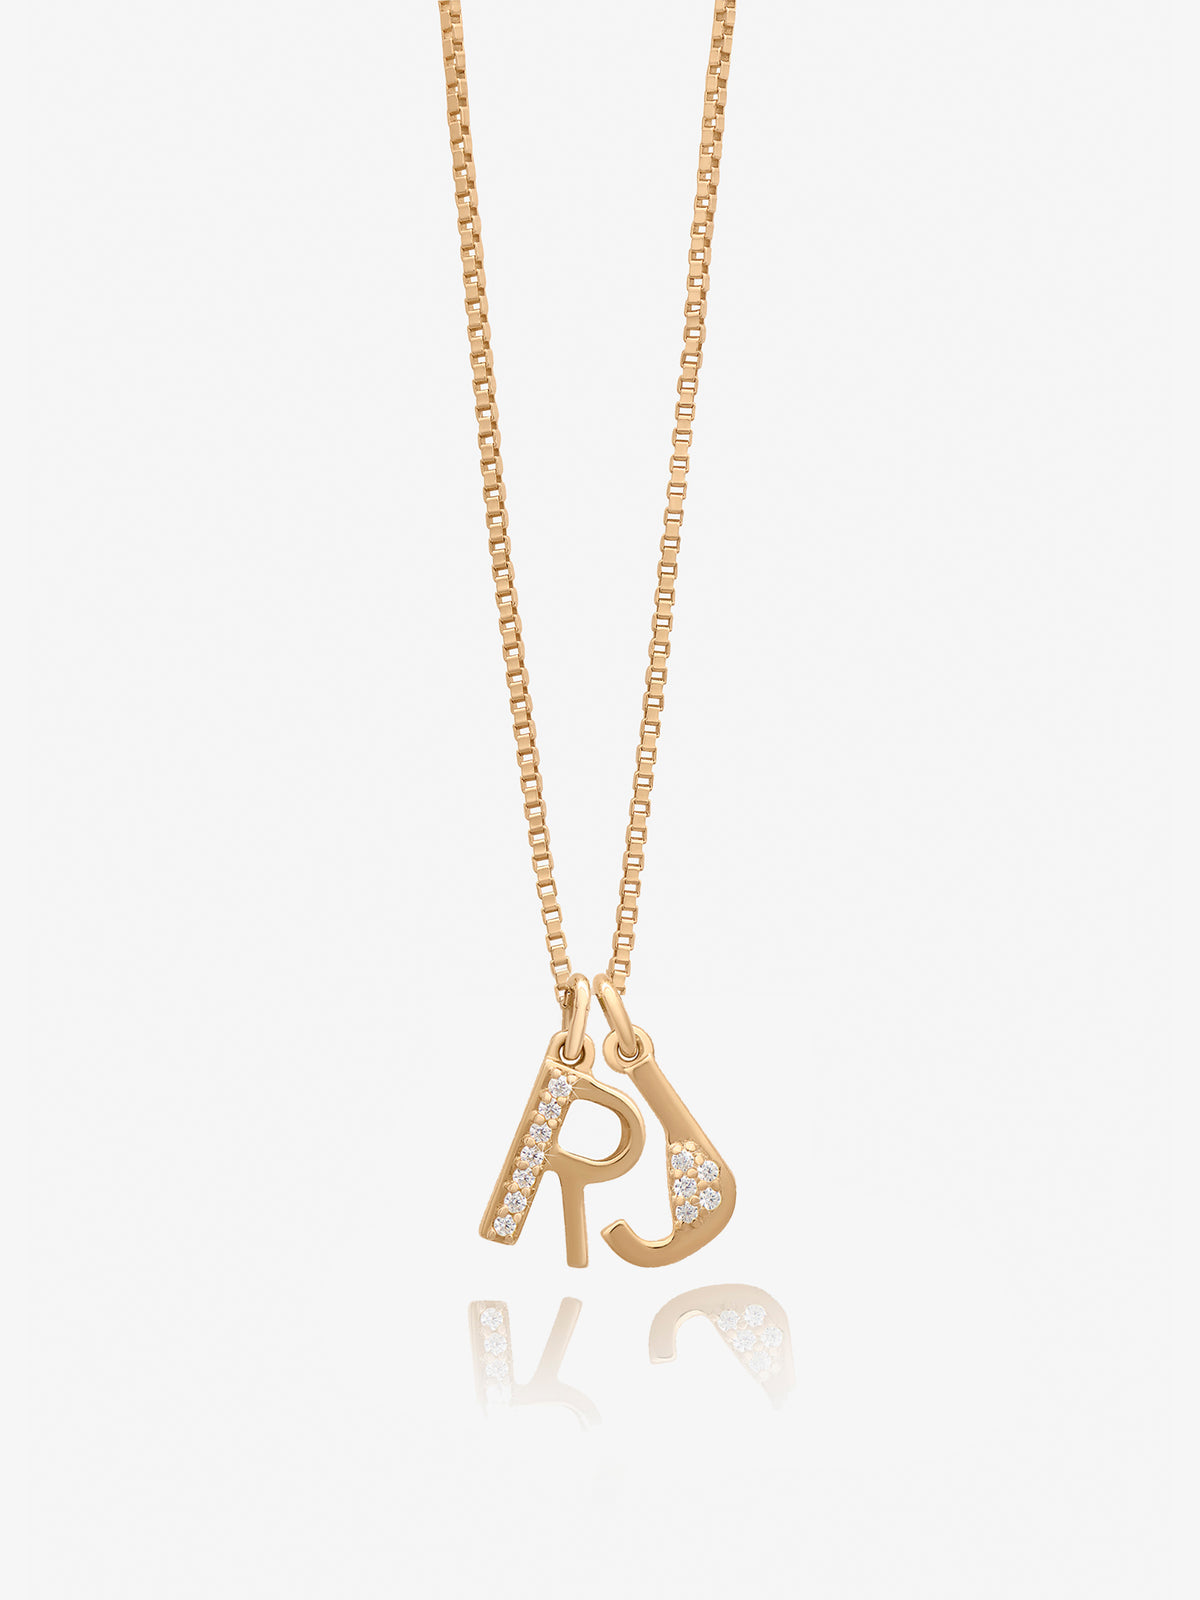 Solid Gold and Diamond Family Initial Necklace